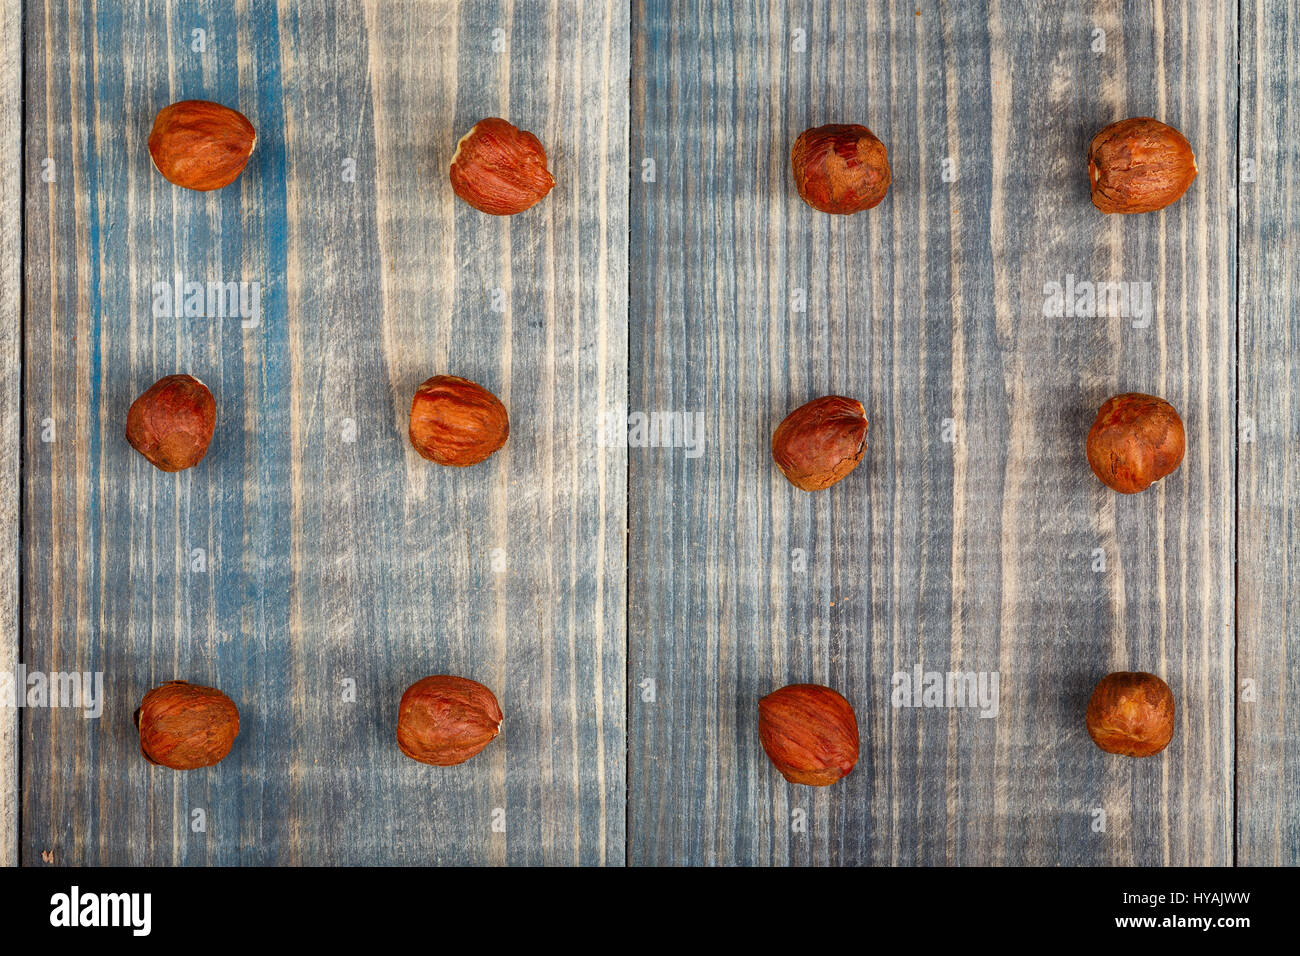 Twelve hazelnut nuts without a shell are arranged in three rows on a wooden background Stock Photo